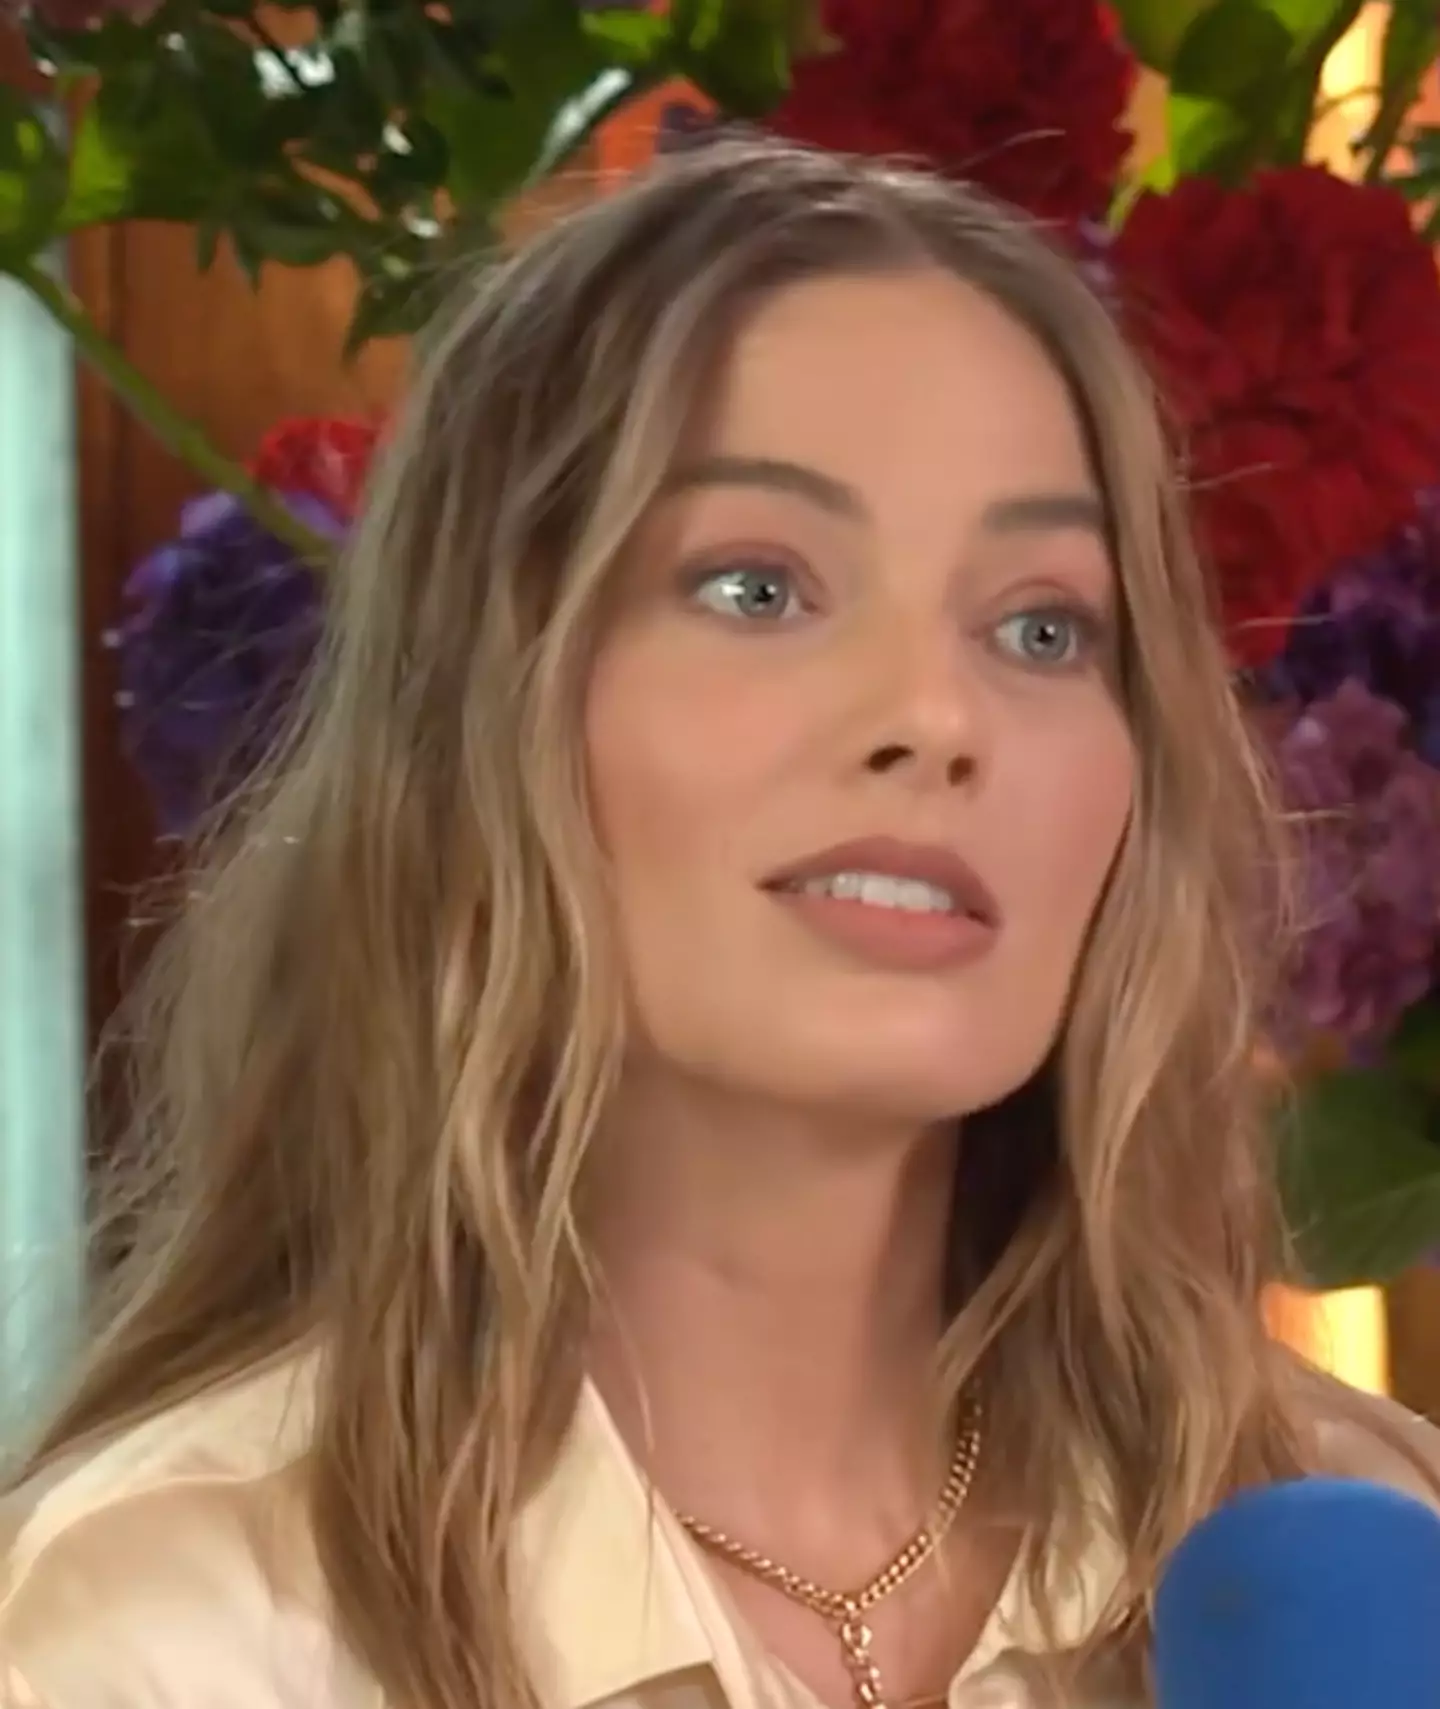 Margot Robbie opened up about The Wolf of Wall Street's 'merkin room'.